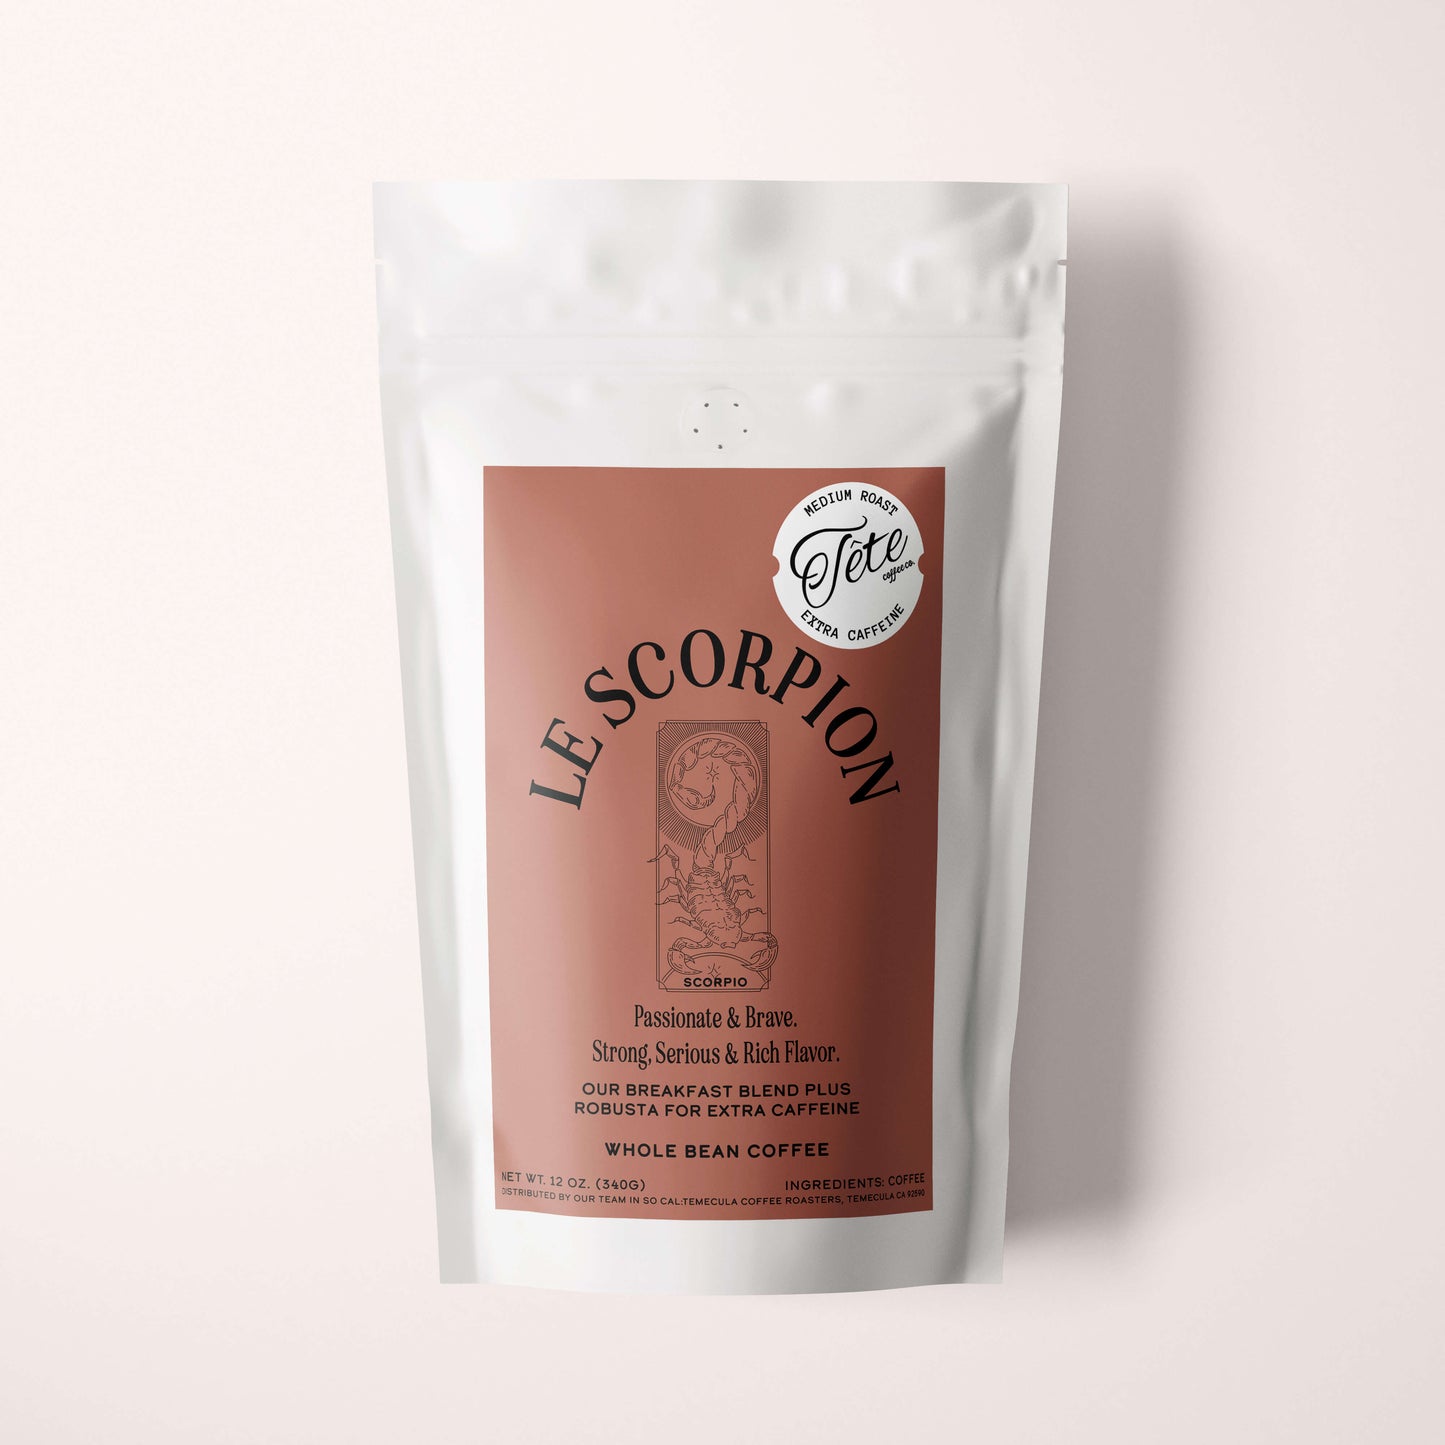 Scorpio inspired gourmet small batch coffee blend from Tete Coffee Co.